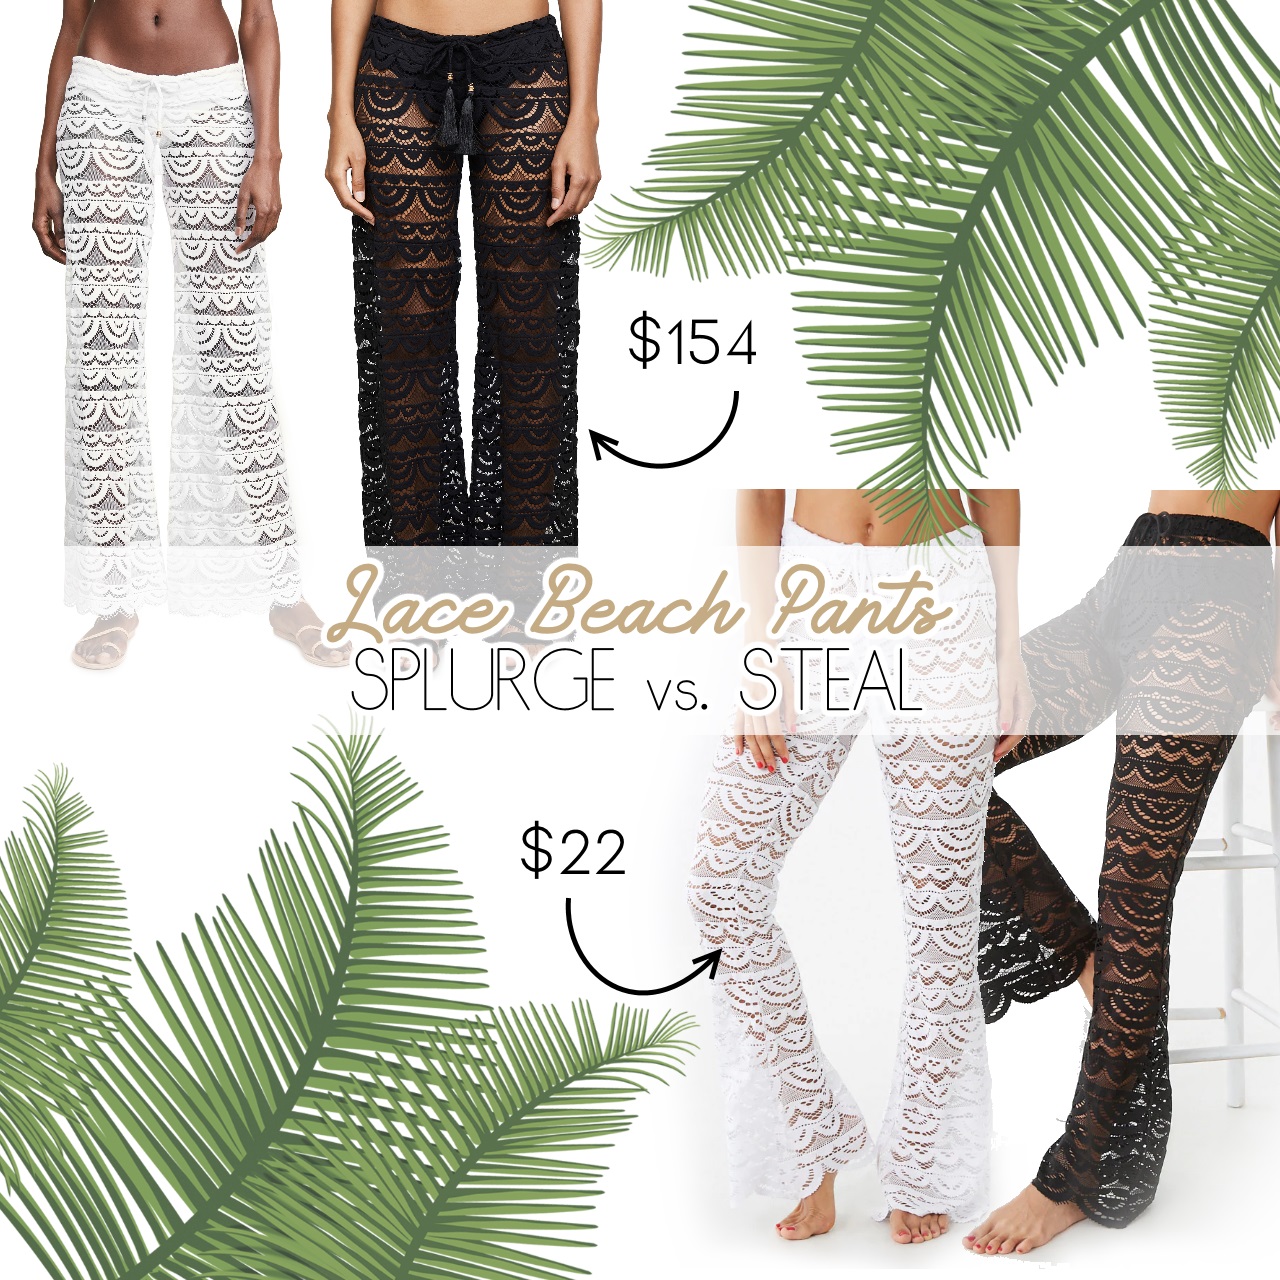  Lace pants, beach pants, what to wear to the beach, swimwear cover up pants, lease cover up pants, forever 21, Pilyq lace Beach Pants, Summer must haves, beach essentials